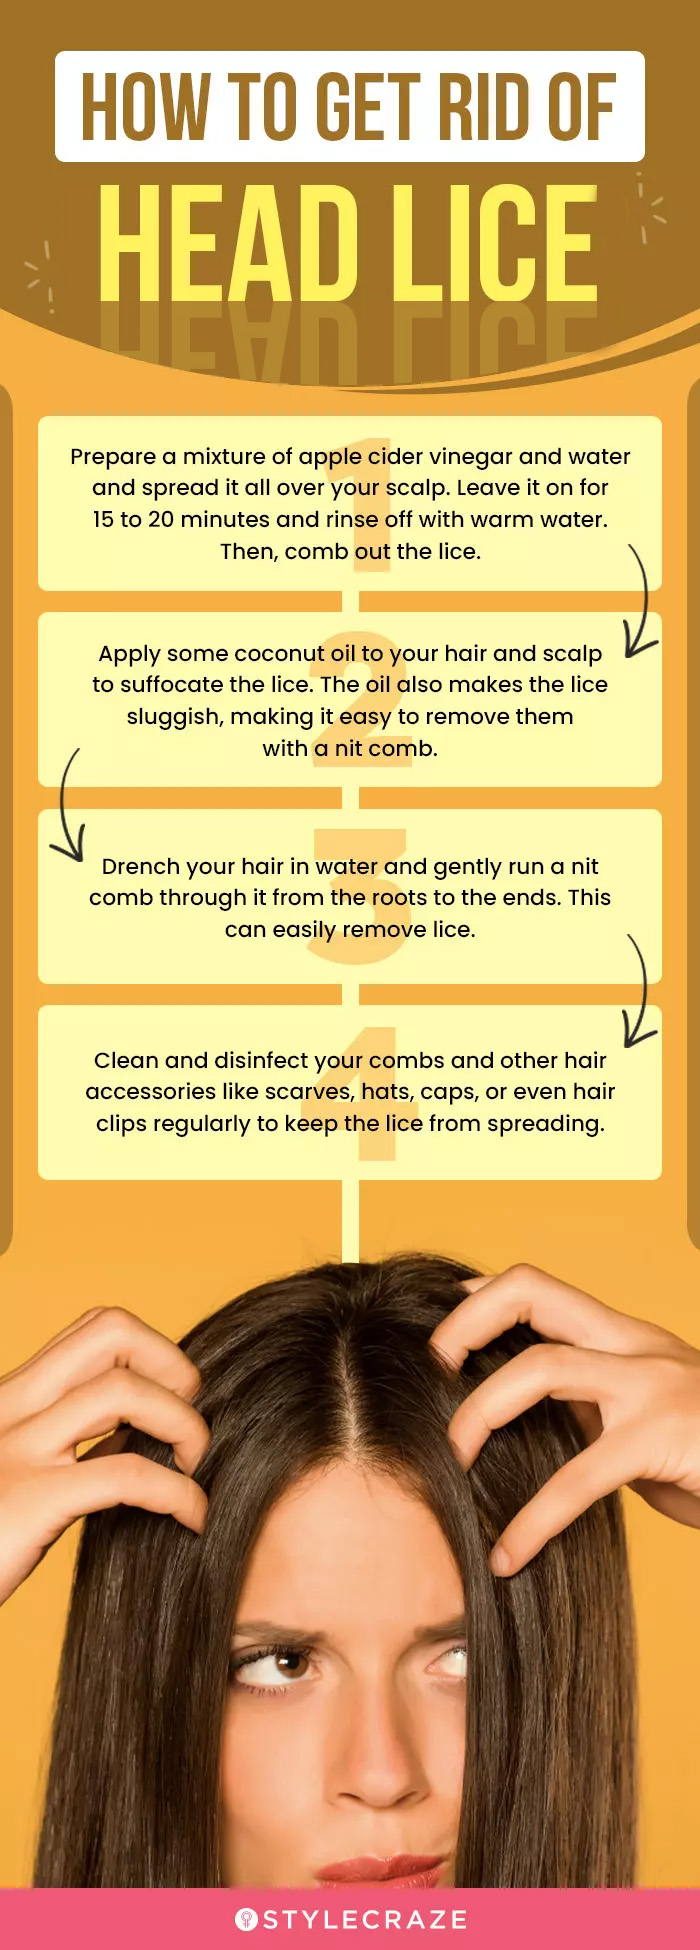 How to Kill and Get Rid of Head Lice: Treatment and Remedies